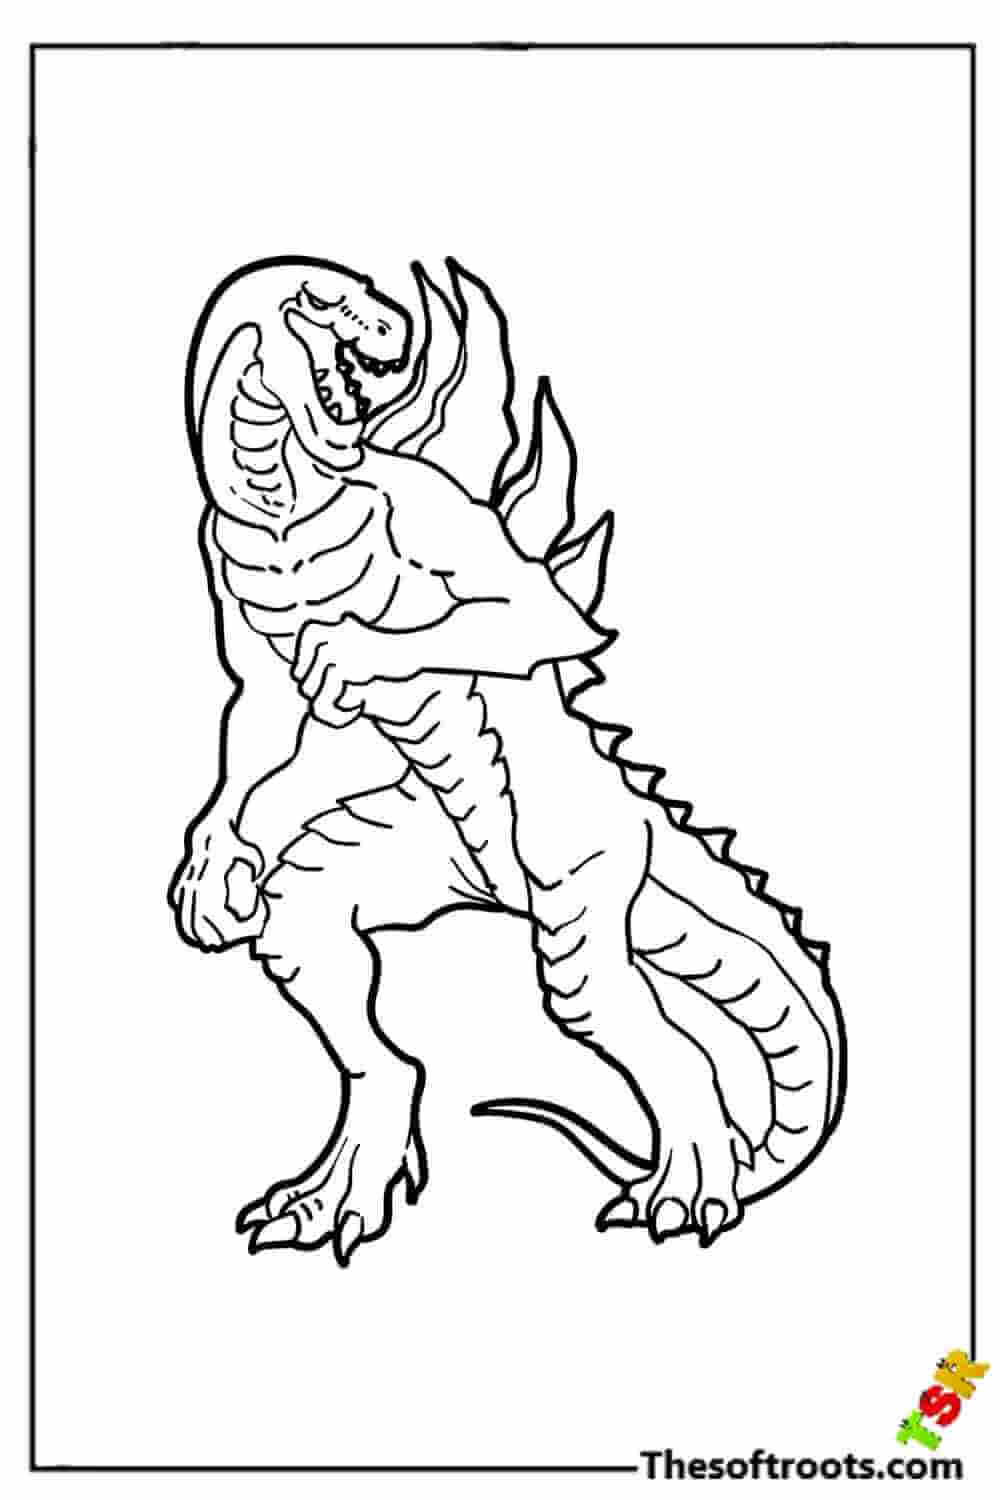 Angry Godzilla coloring pages